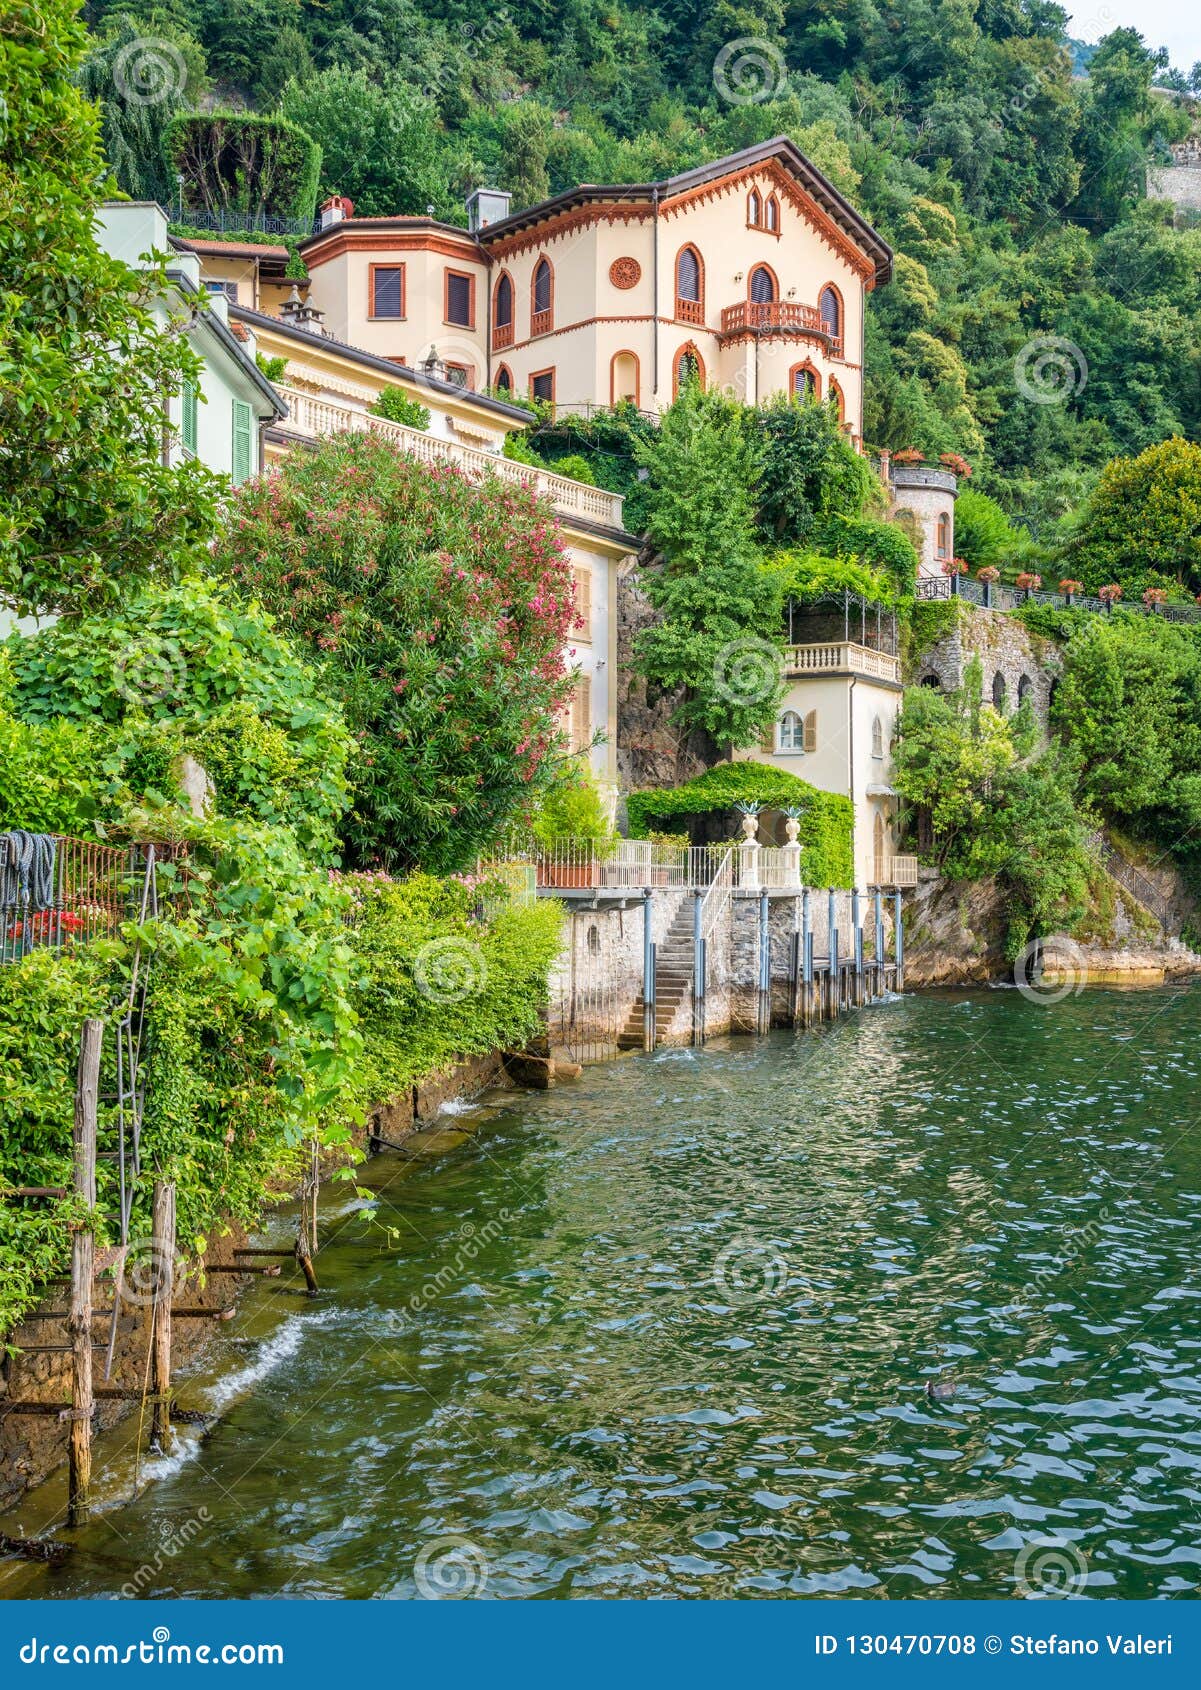 scenic sight in torno, colorful and picturesque village on lake como. lombardy, italy.